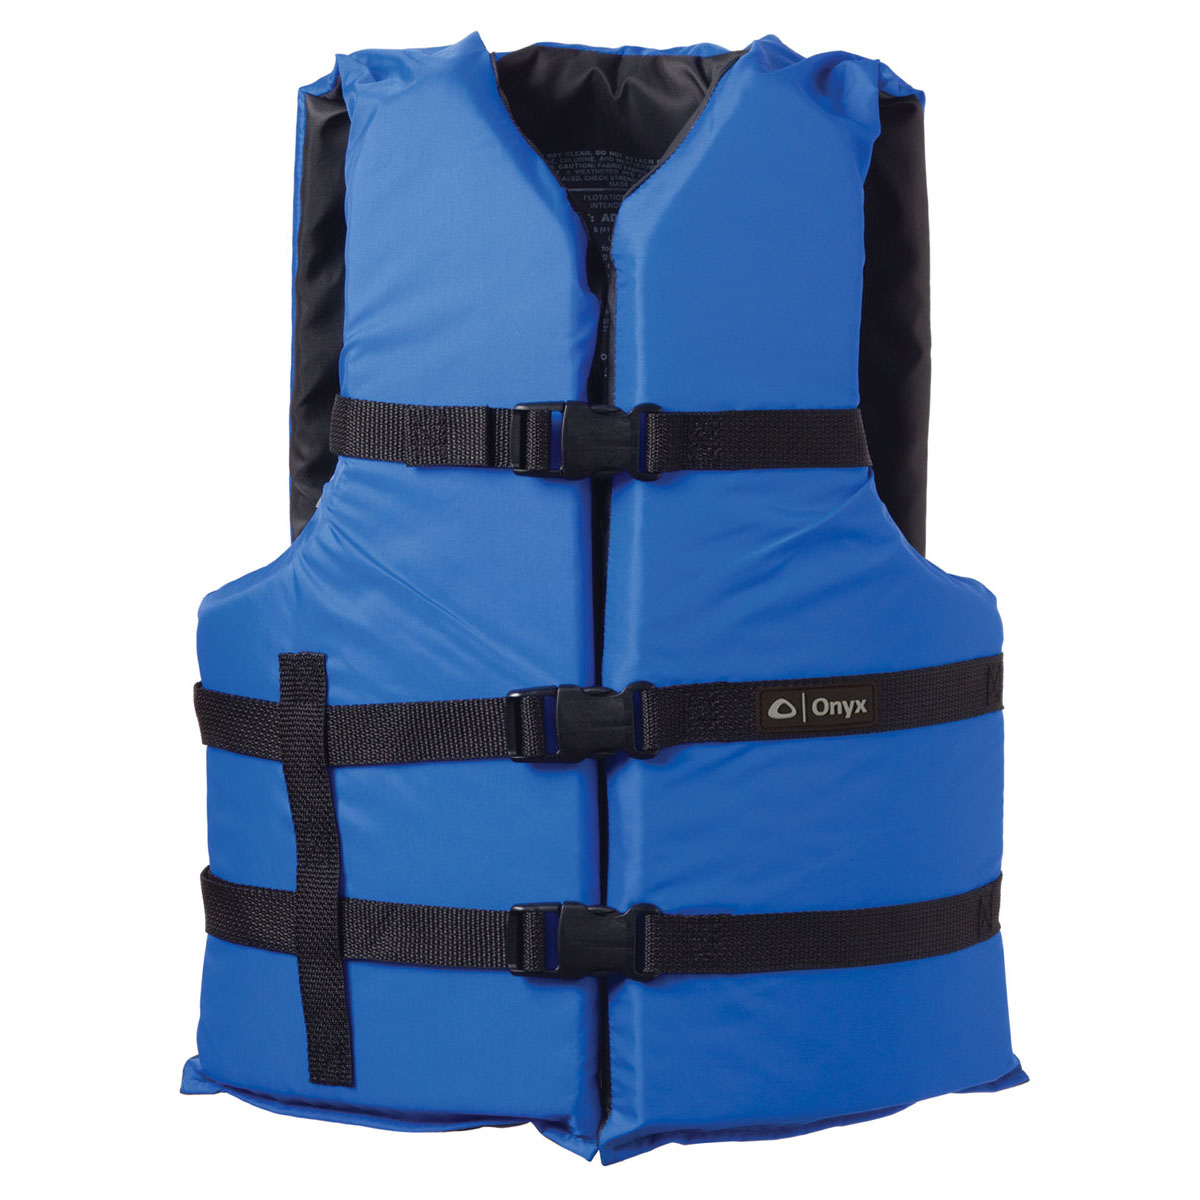 Details about   Kayaking Adult Safety Buoyancy Jacket Life Vest Reflective Strap with Whistle 